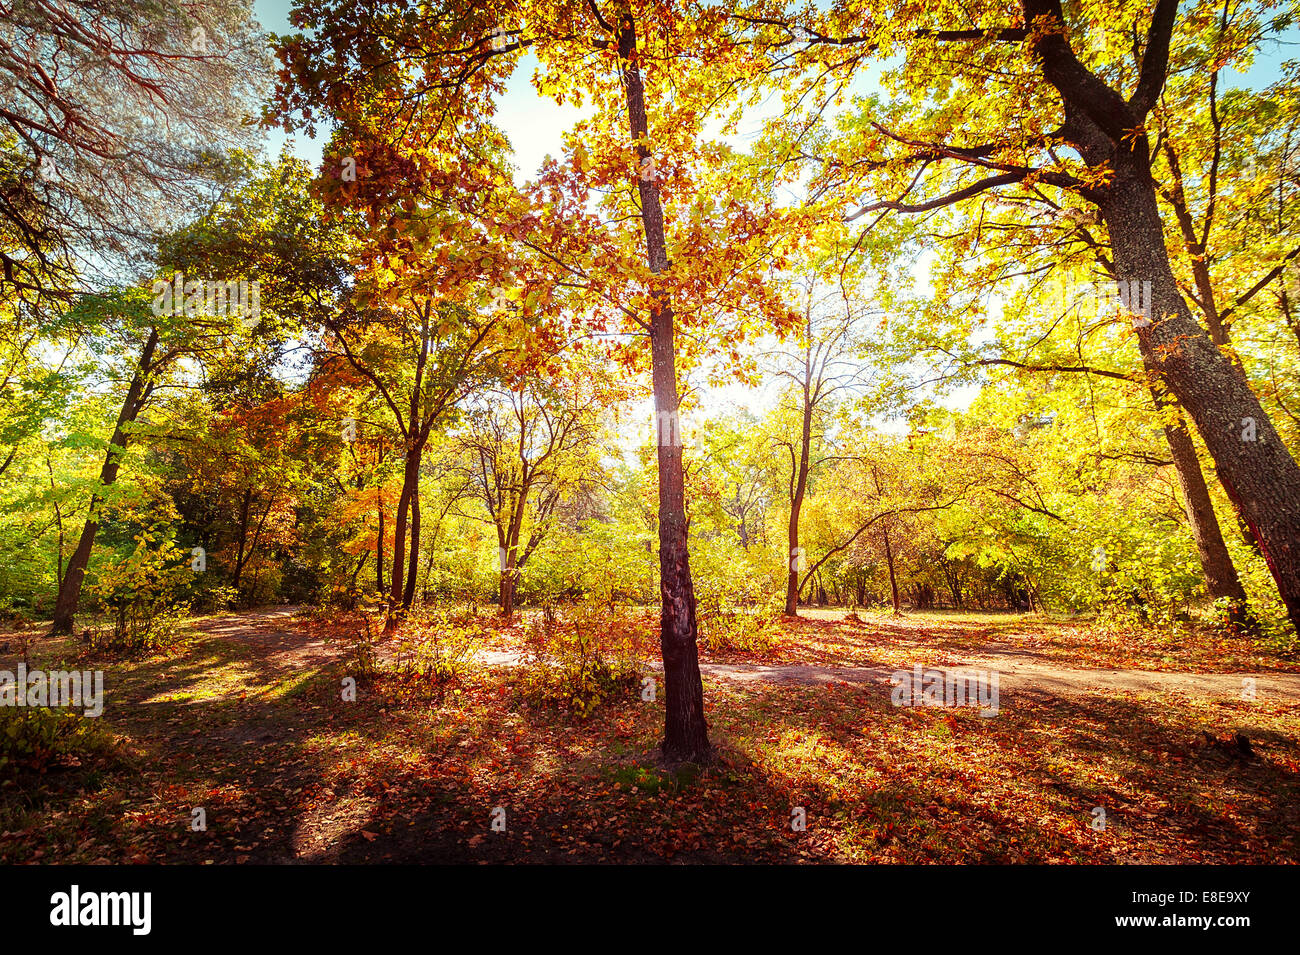 Sunny day in outdoor park with colorful autumn trees. Amazing bright colors of nature landscape Stock Photo